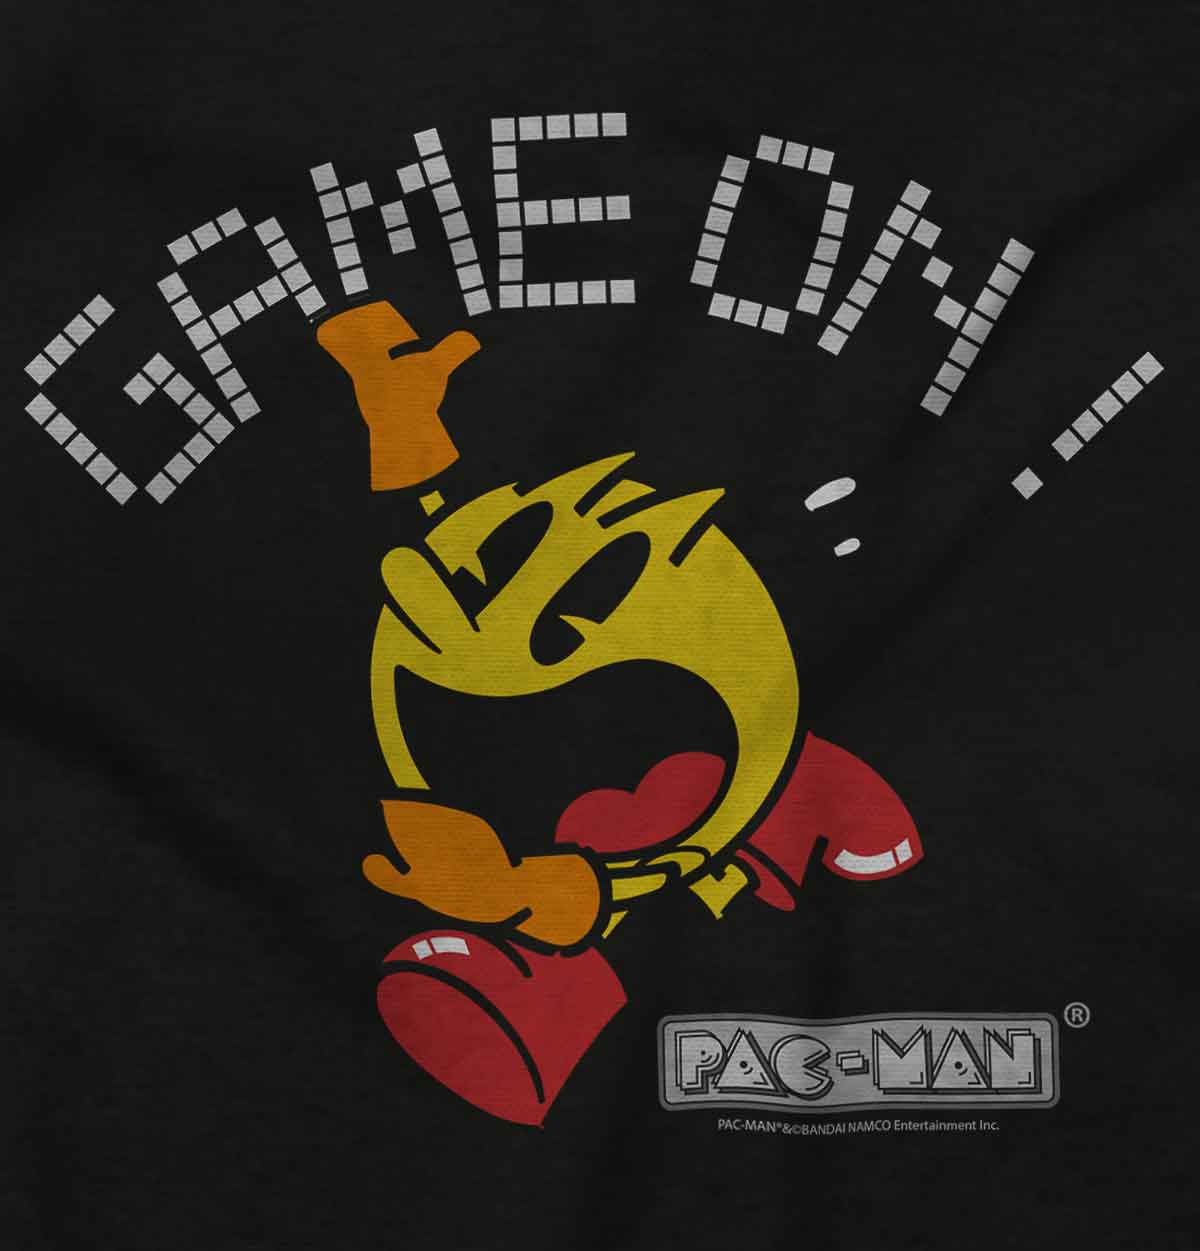 Shop Our Officially Licensed Pac-Man Apparel